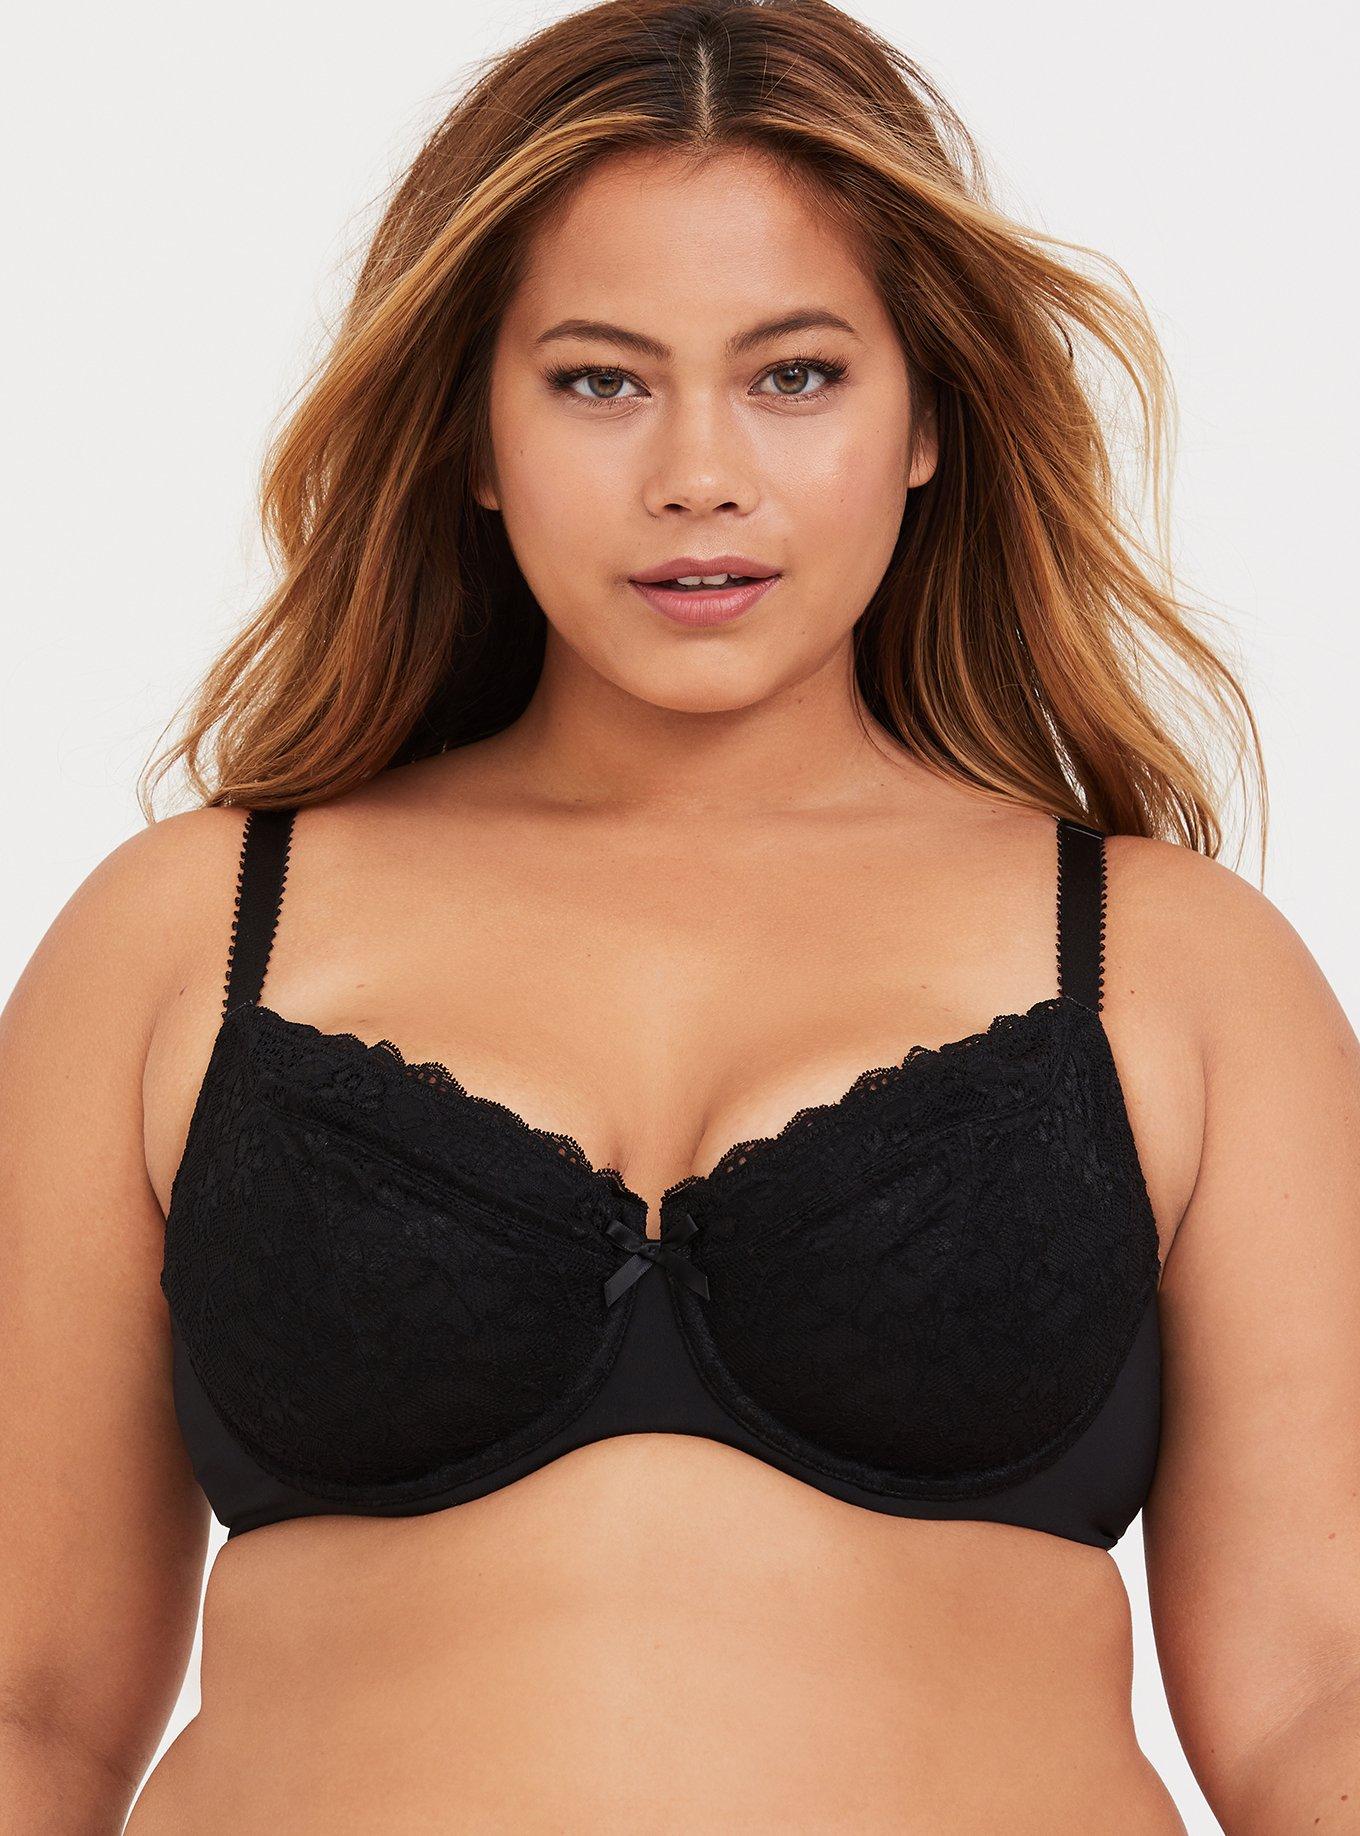 Unlined Underwire Bra Best Bra for Plus Size Saggy Breasts